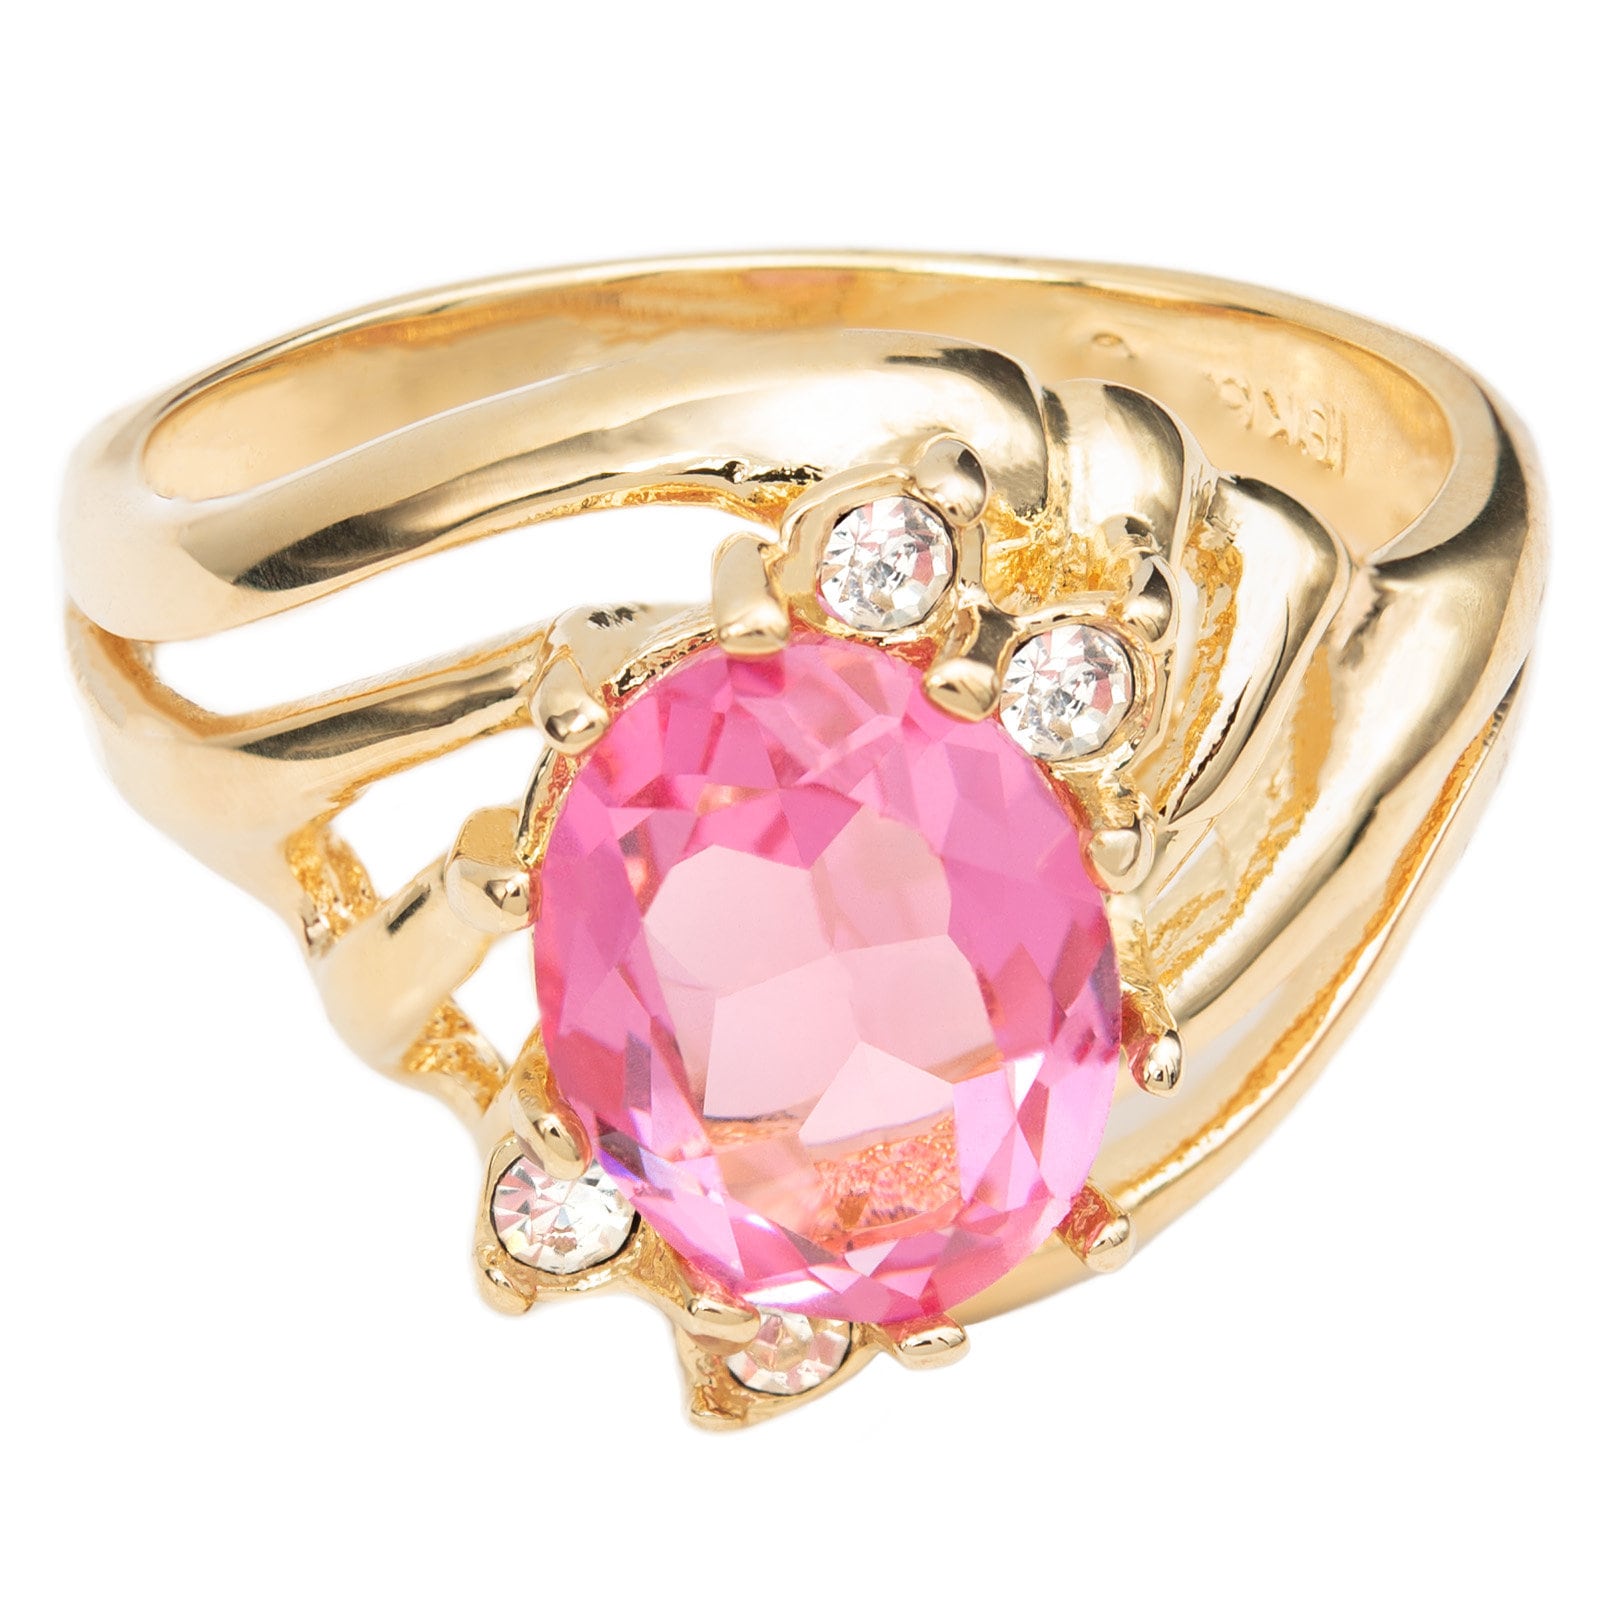 Vintage Ring Pink Tourmaline and Clear Austrian Crystals 18k Gold Antique Womans Jewelry #R1143 - Limited Stock - Never Worn